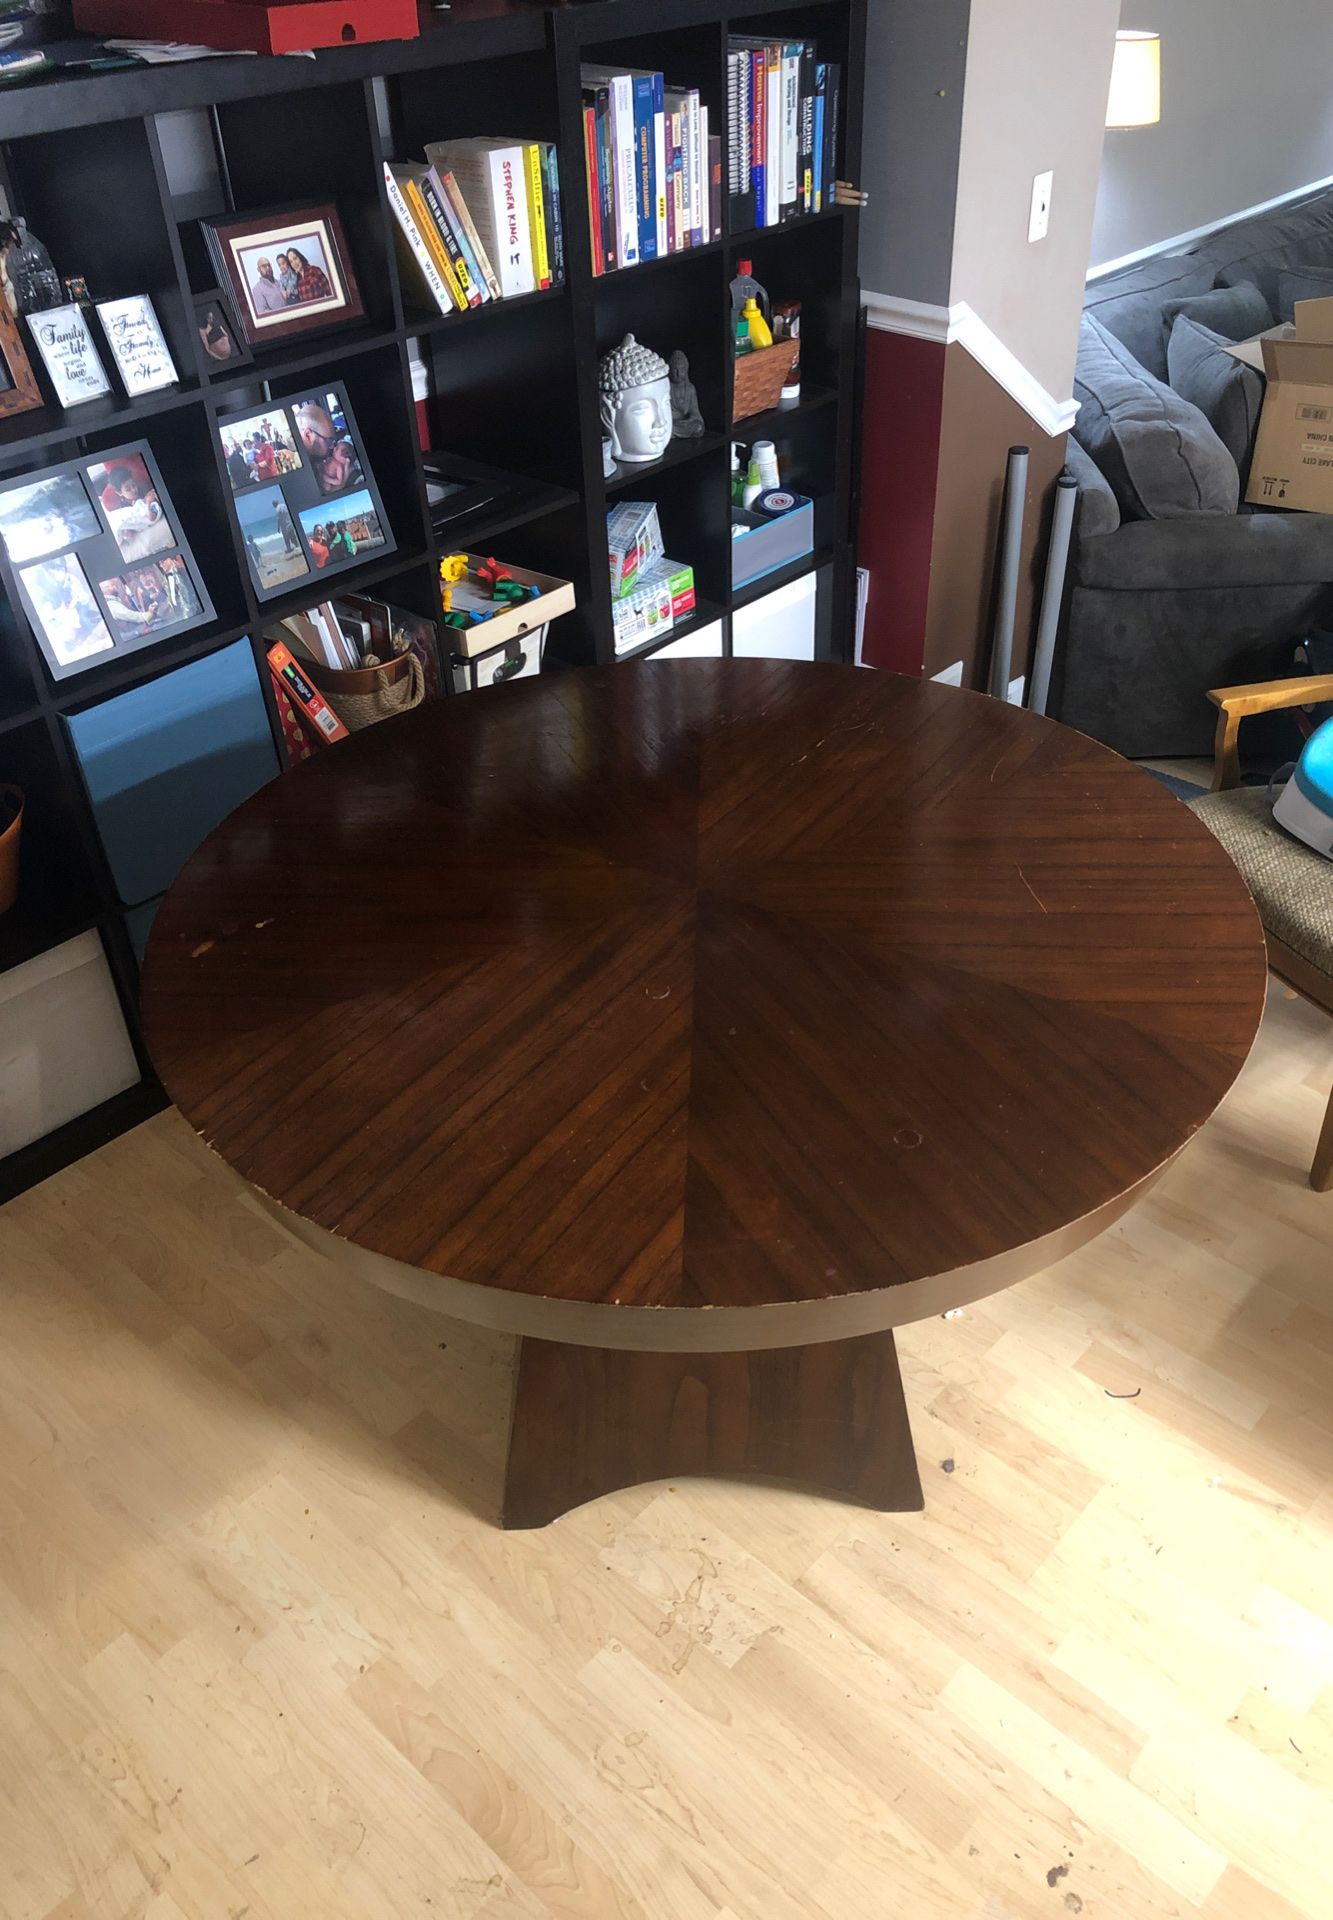 Pier 1 Imports - Round dining table and chairs